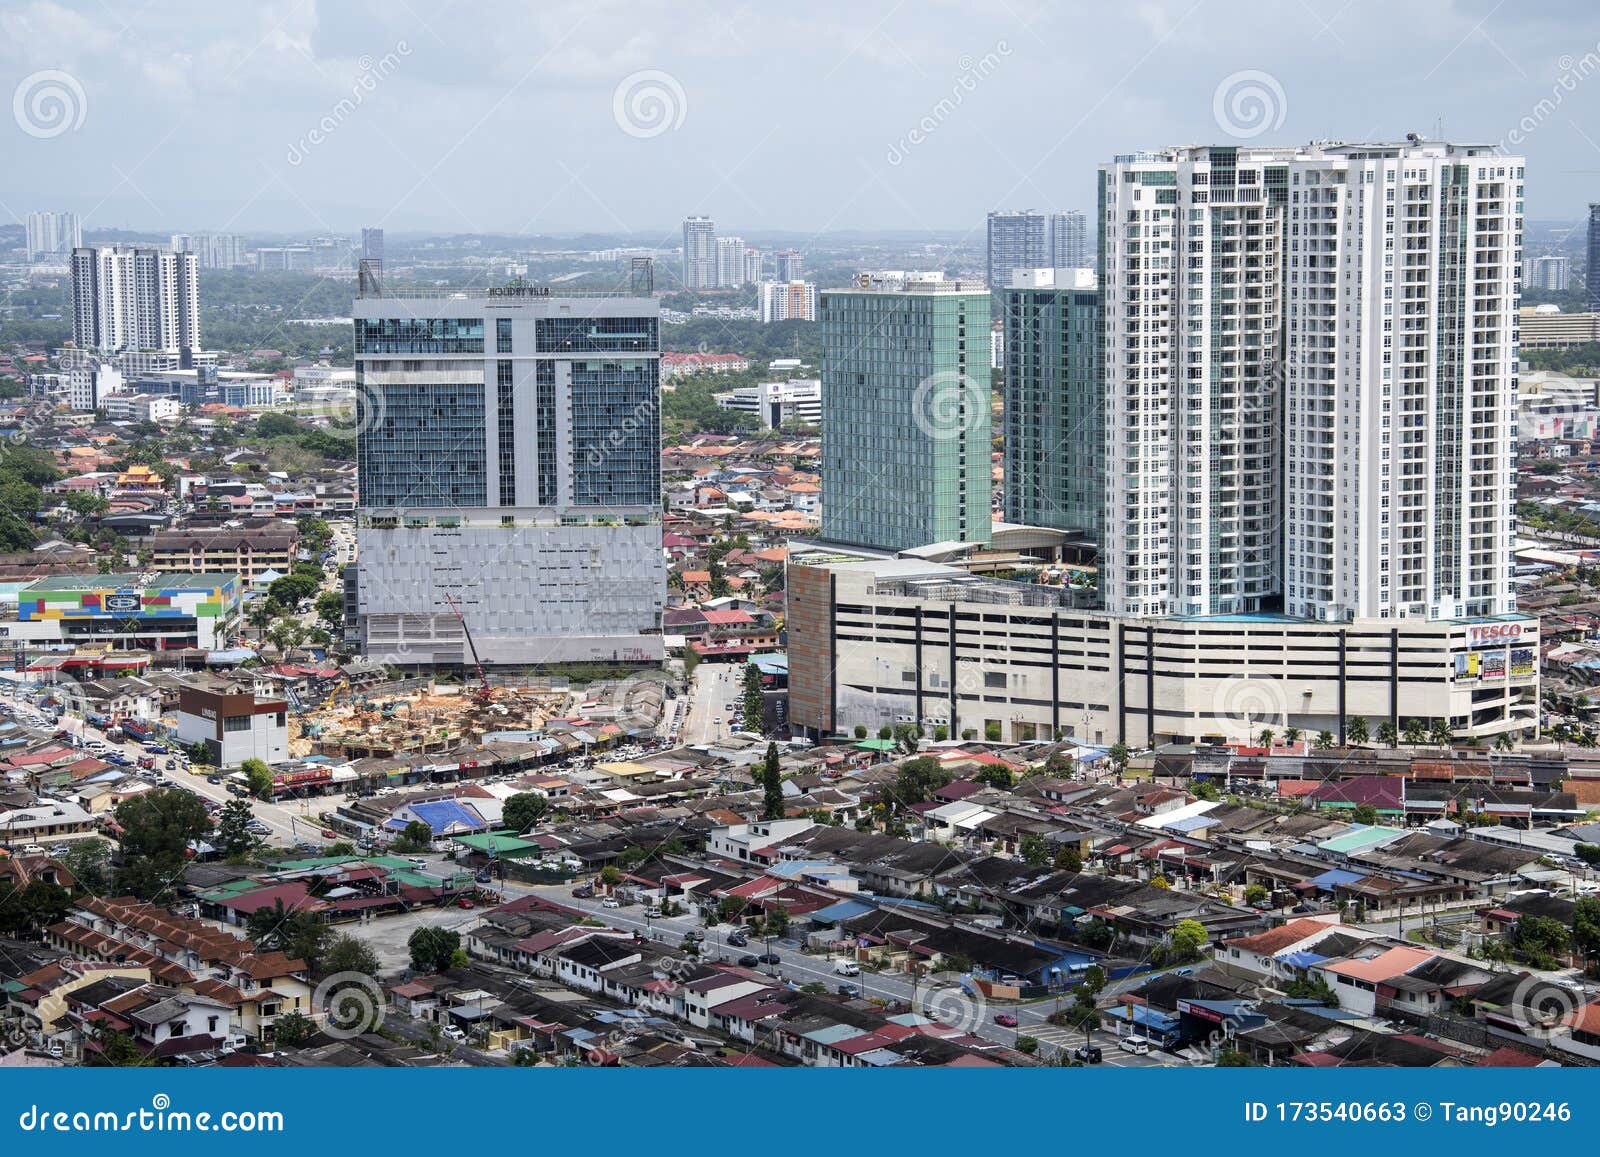 Aerial View of Johor Bahru City Editorial Stock Photo - Image of